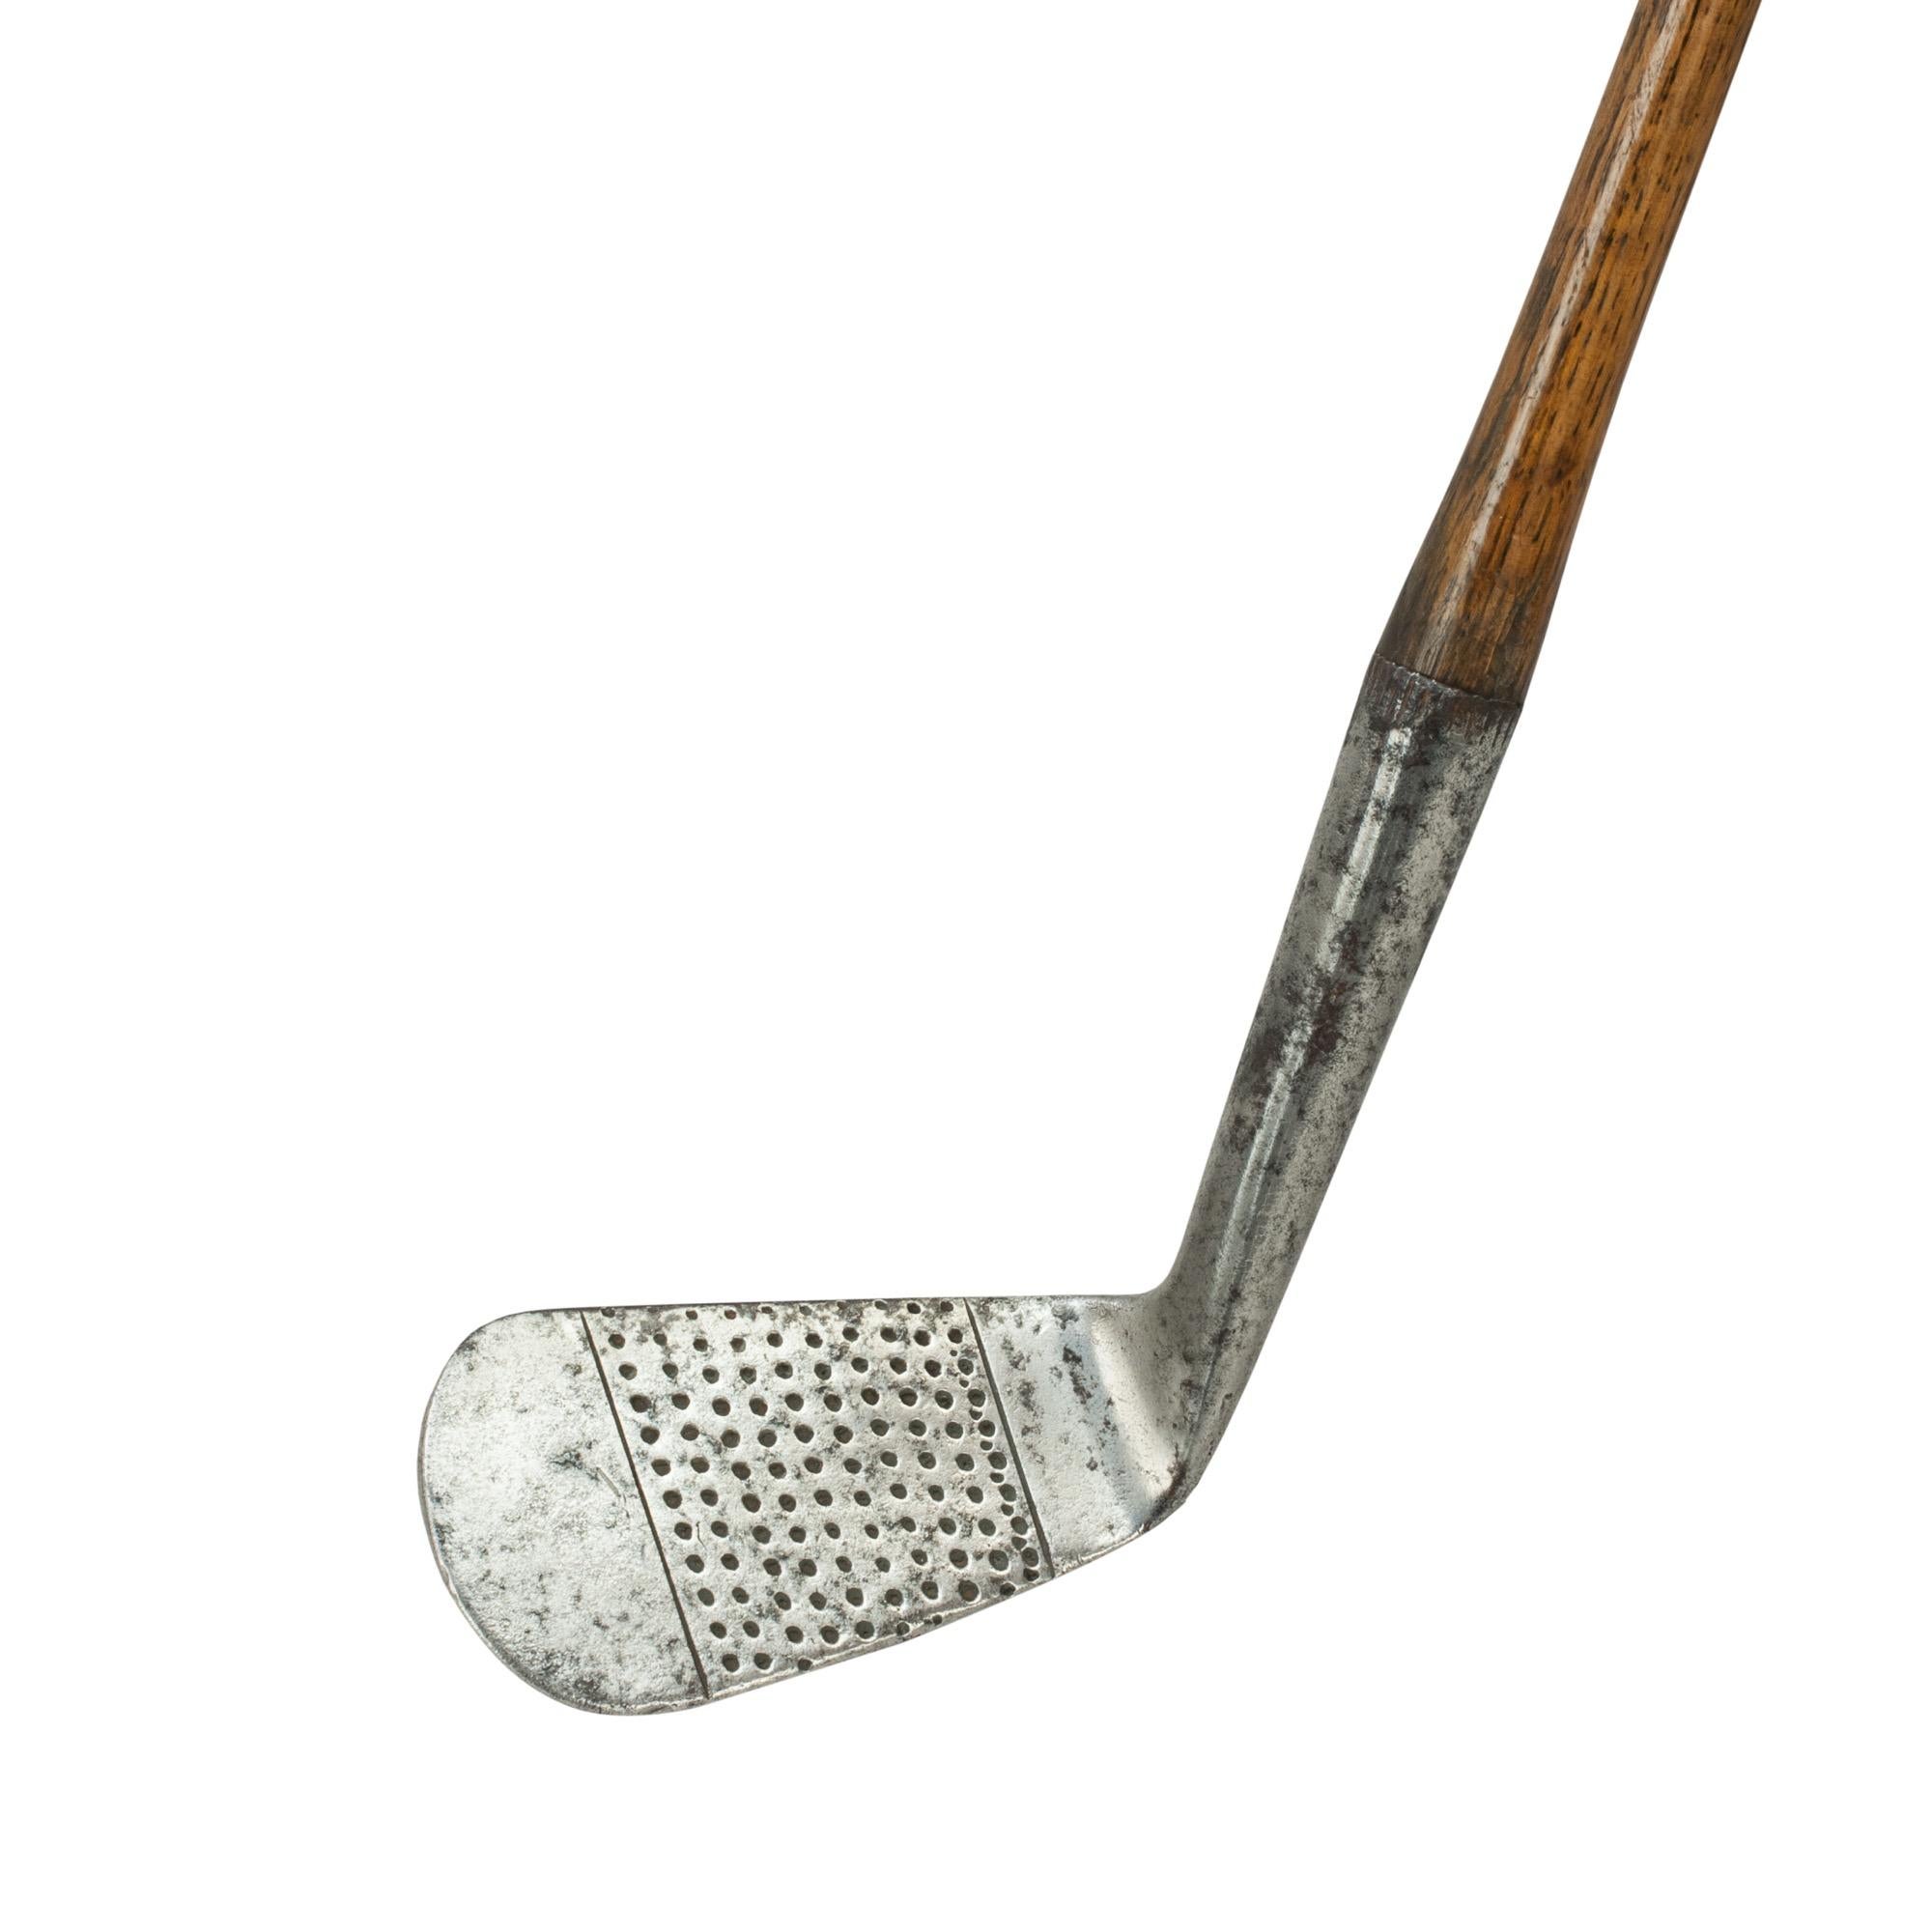 Vintage hickory golf club, iron, by Tom Stewart, St Andrews.
A fine and nicely weighted dot punched faced lofting iron by Tom Stewart of St. Andrews. The hickory shaft with polished leather grip, the rear of the club head marked with Stewart's